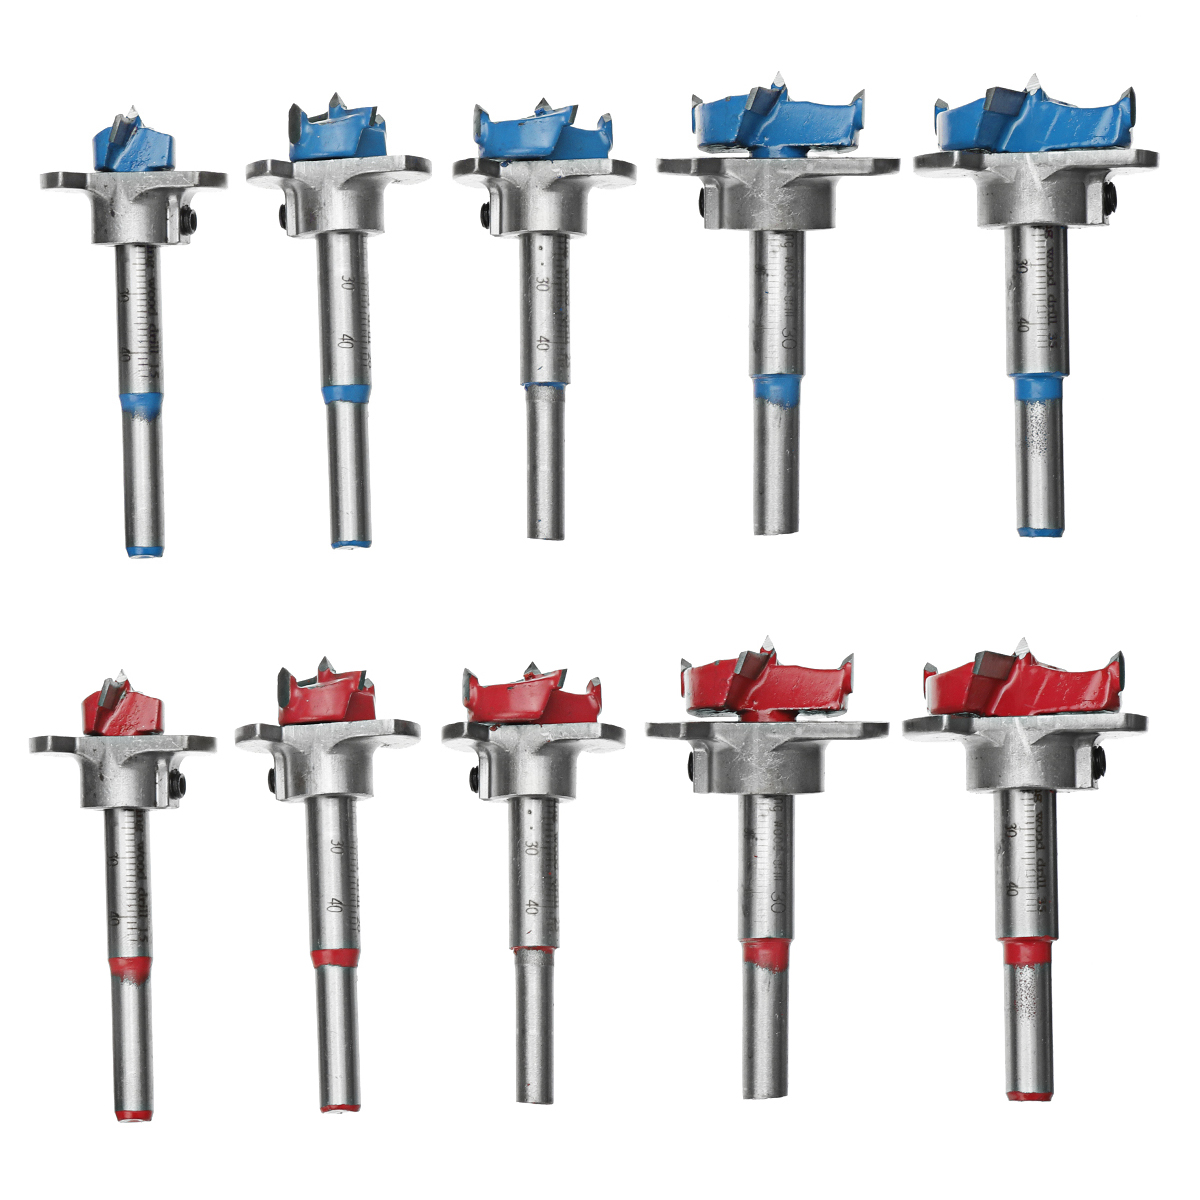 7pcs-Blue-or-Red-Woodworking-Hinge-Hole-Opener-Set-Positioning-Hole-Saw-Cutter-Drill-Bits-1615475-3